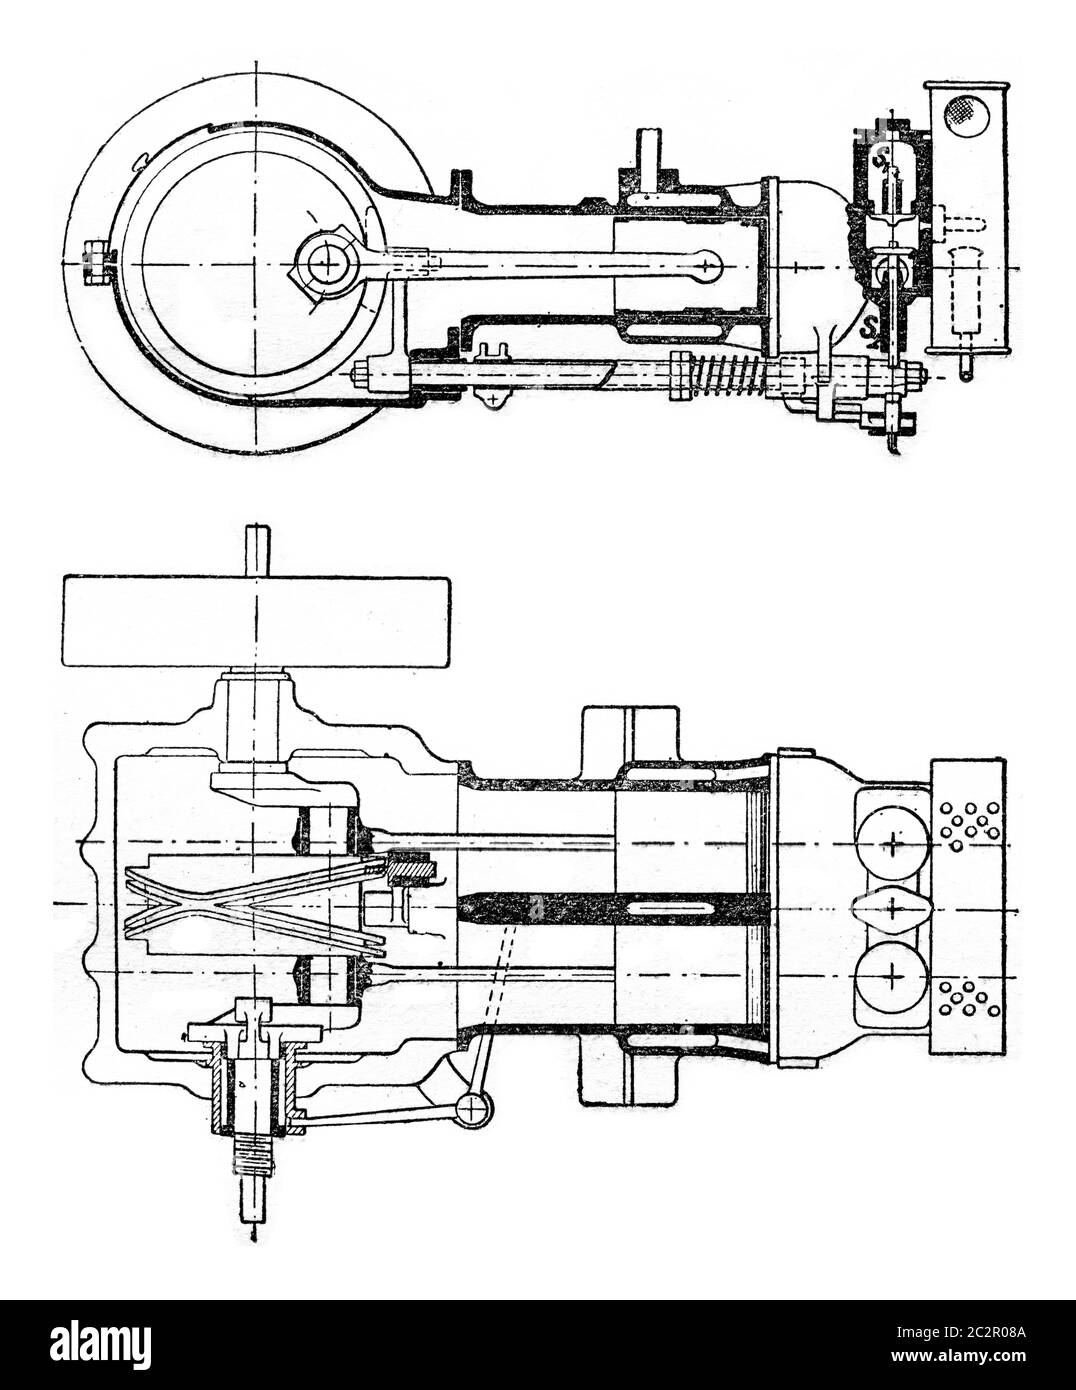 Horizontal engine with two cylinders placed side by side, vintage engraved illustration. Industrial encyclopedia E.-O. Lami - 1875. Stock Photo